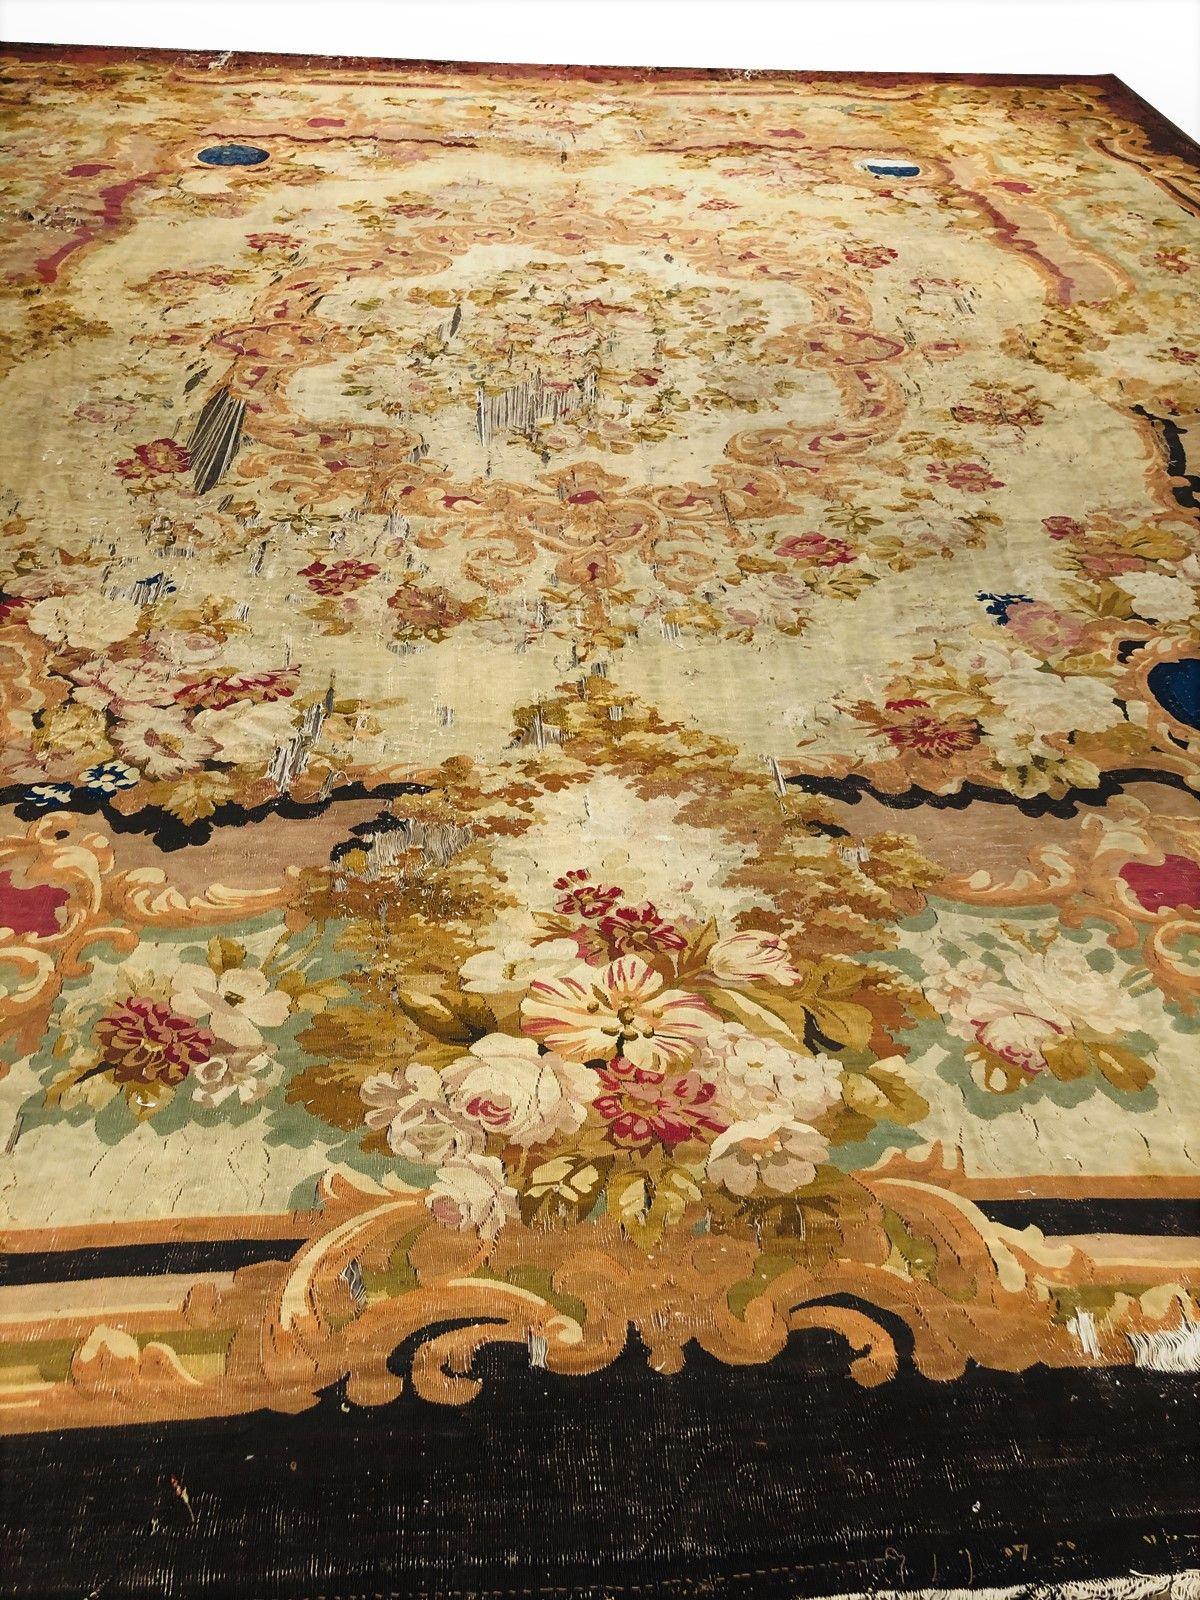 About Us~ Welcome to Antique Rug Collection. Your #1 Source for handmade Antique Rugs & Tapestries at great prices, curated by leading industry expert. We are a 6th Generation antique rug shop with 48+ years of experience working with designers,